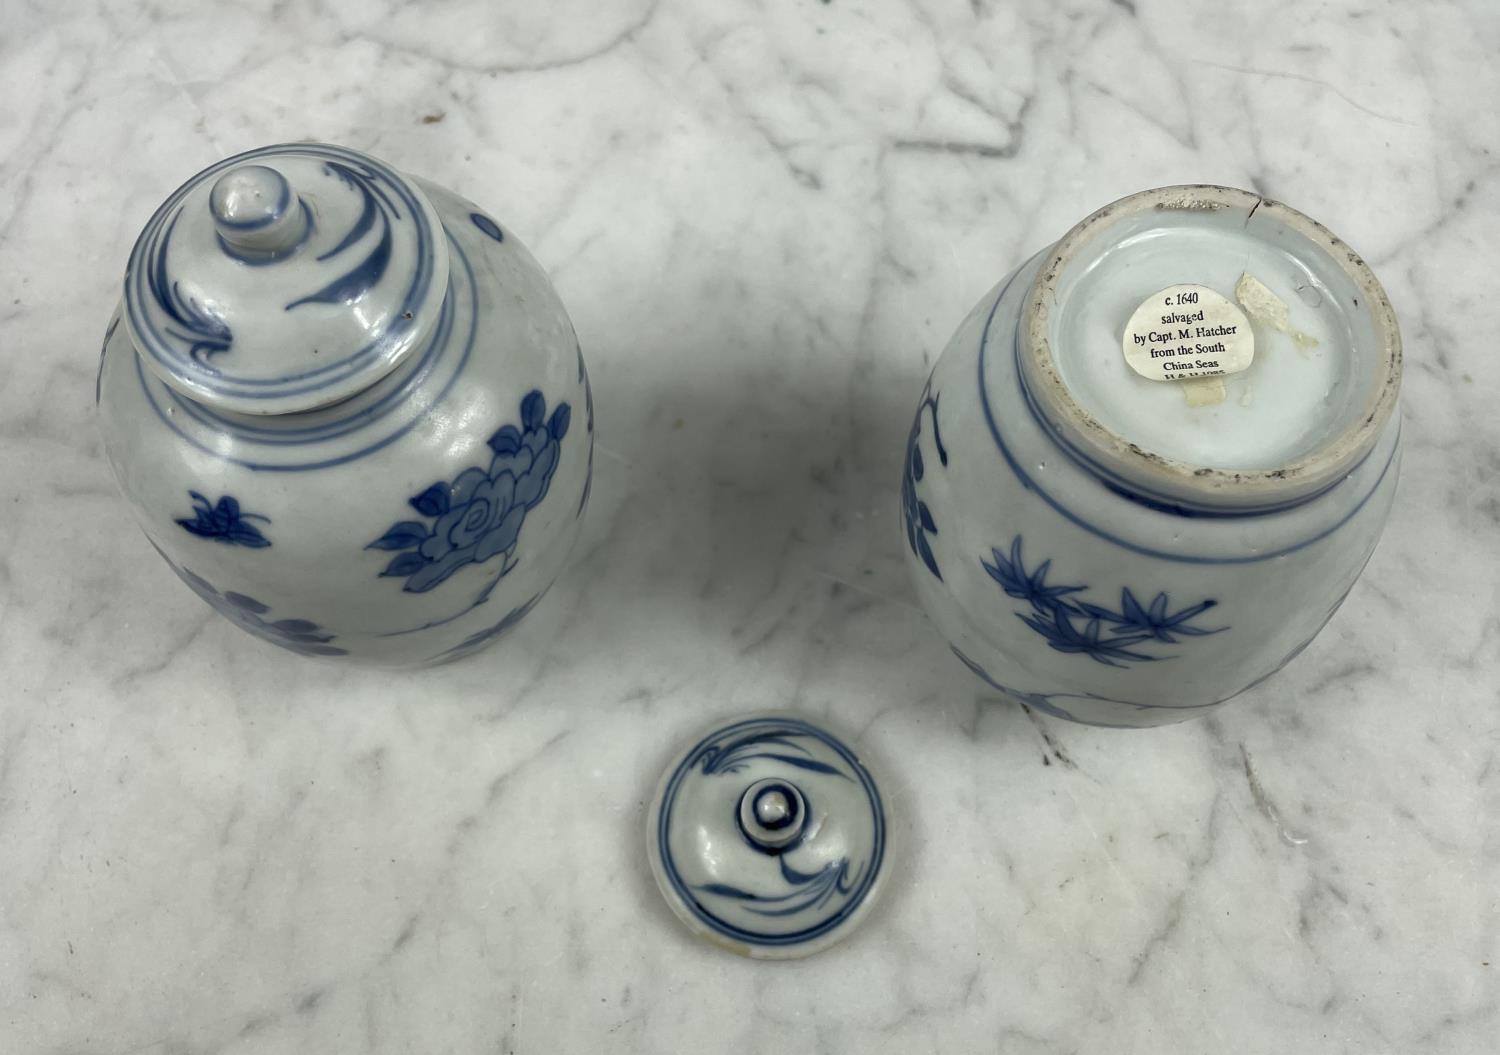 HATCHER CARGO SMALL LIDDED VASES, a pair, in blue and white foliate decoration, 13cm H. (2) - Image 4 of 7